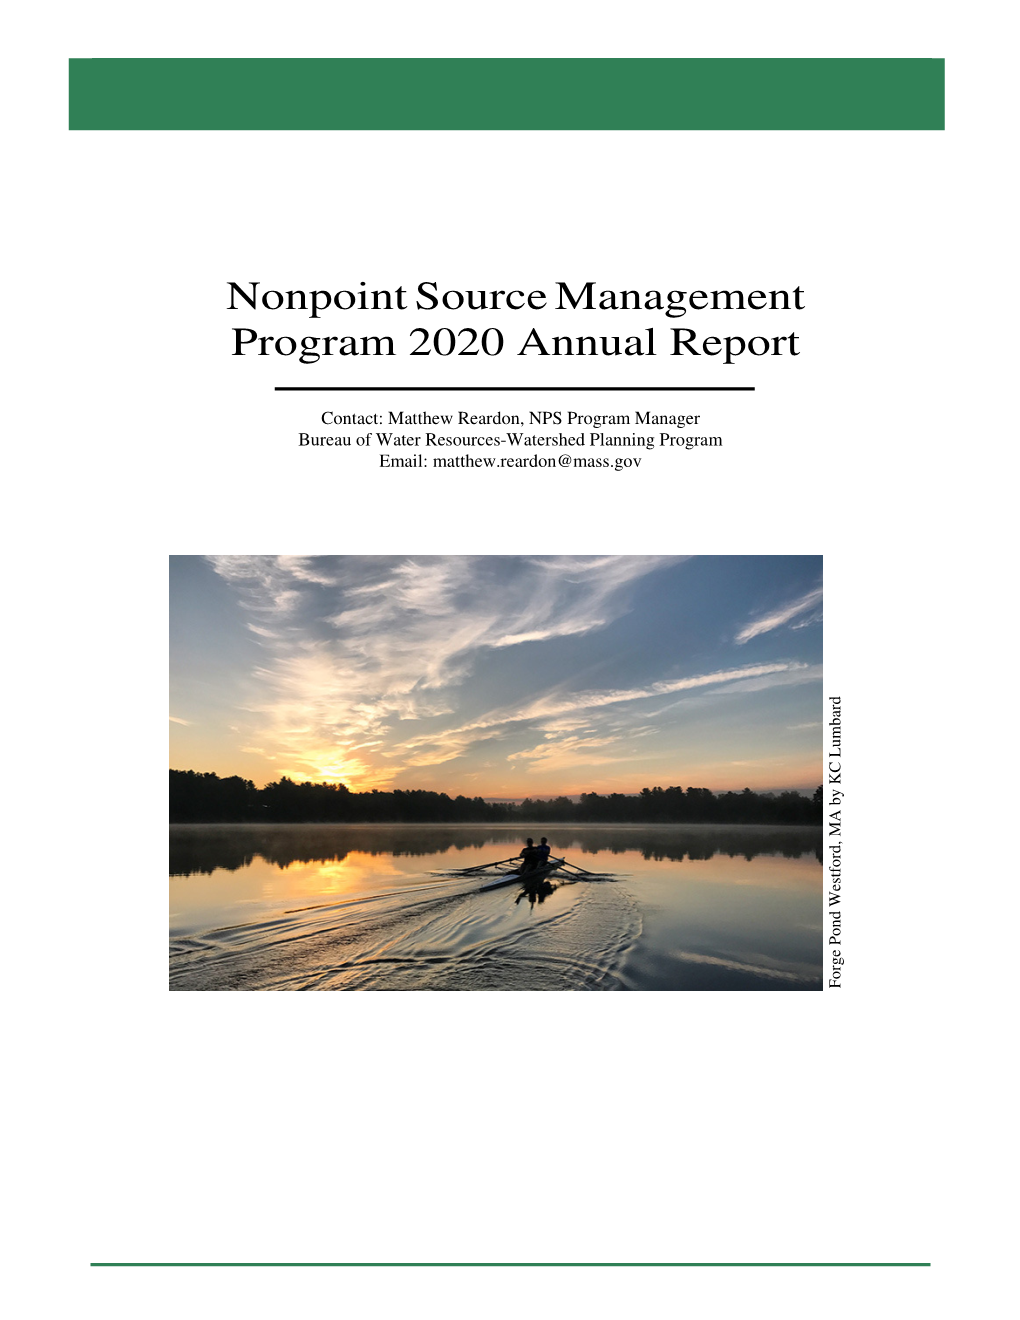 Nonpoint Source Management Program 2020 Annual Report